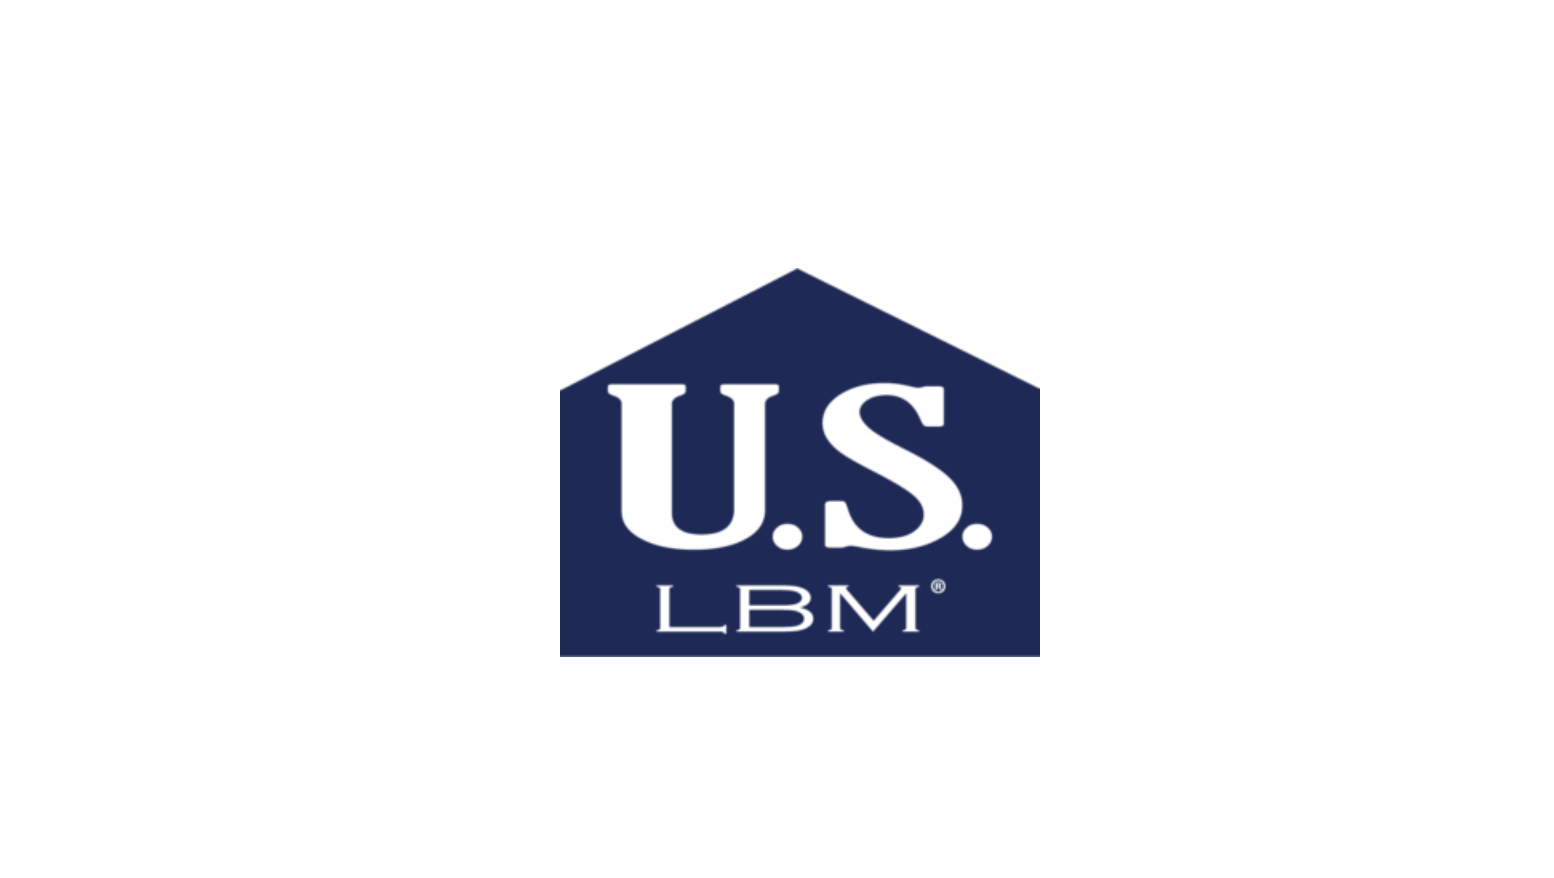 Andrew Campbell will be responsible for all aspects of US LBM’s technology platform and systems, the company said.